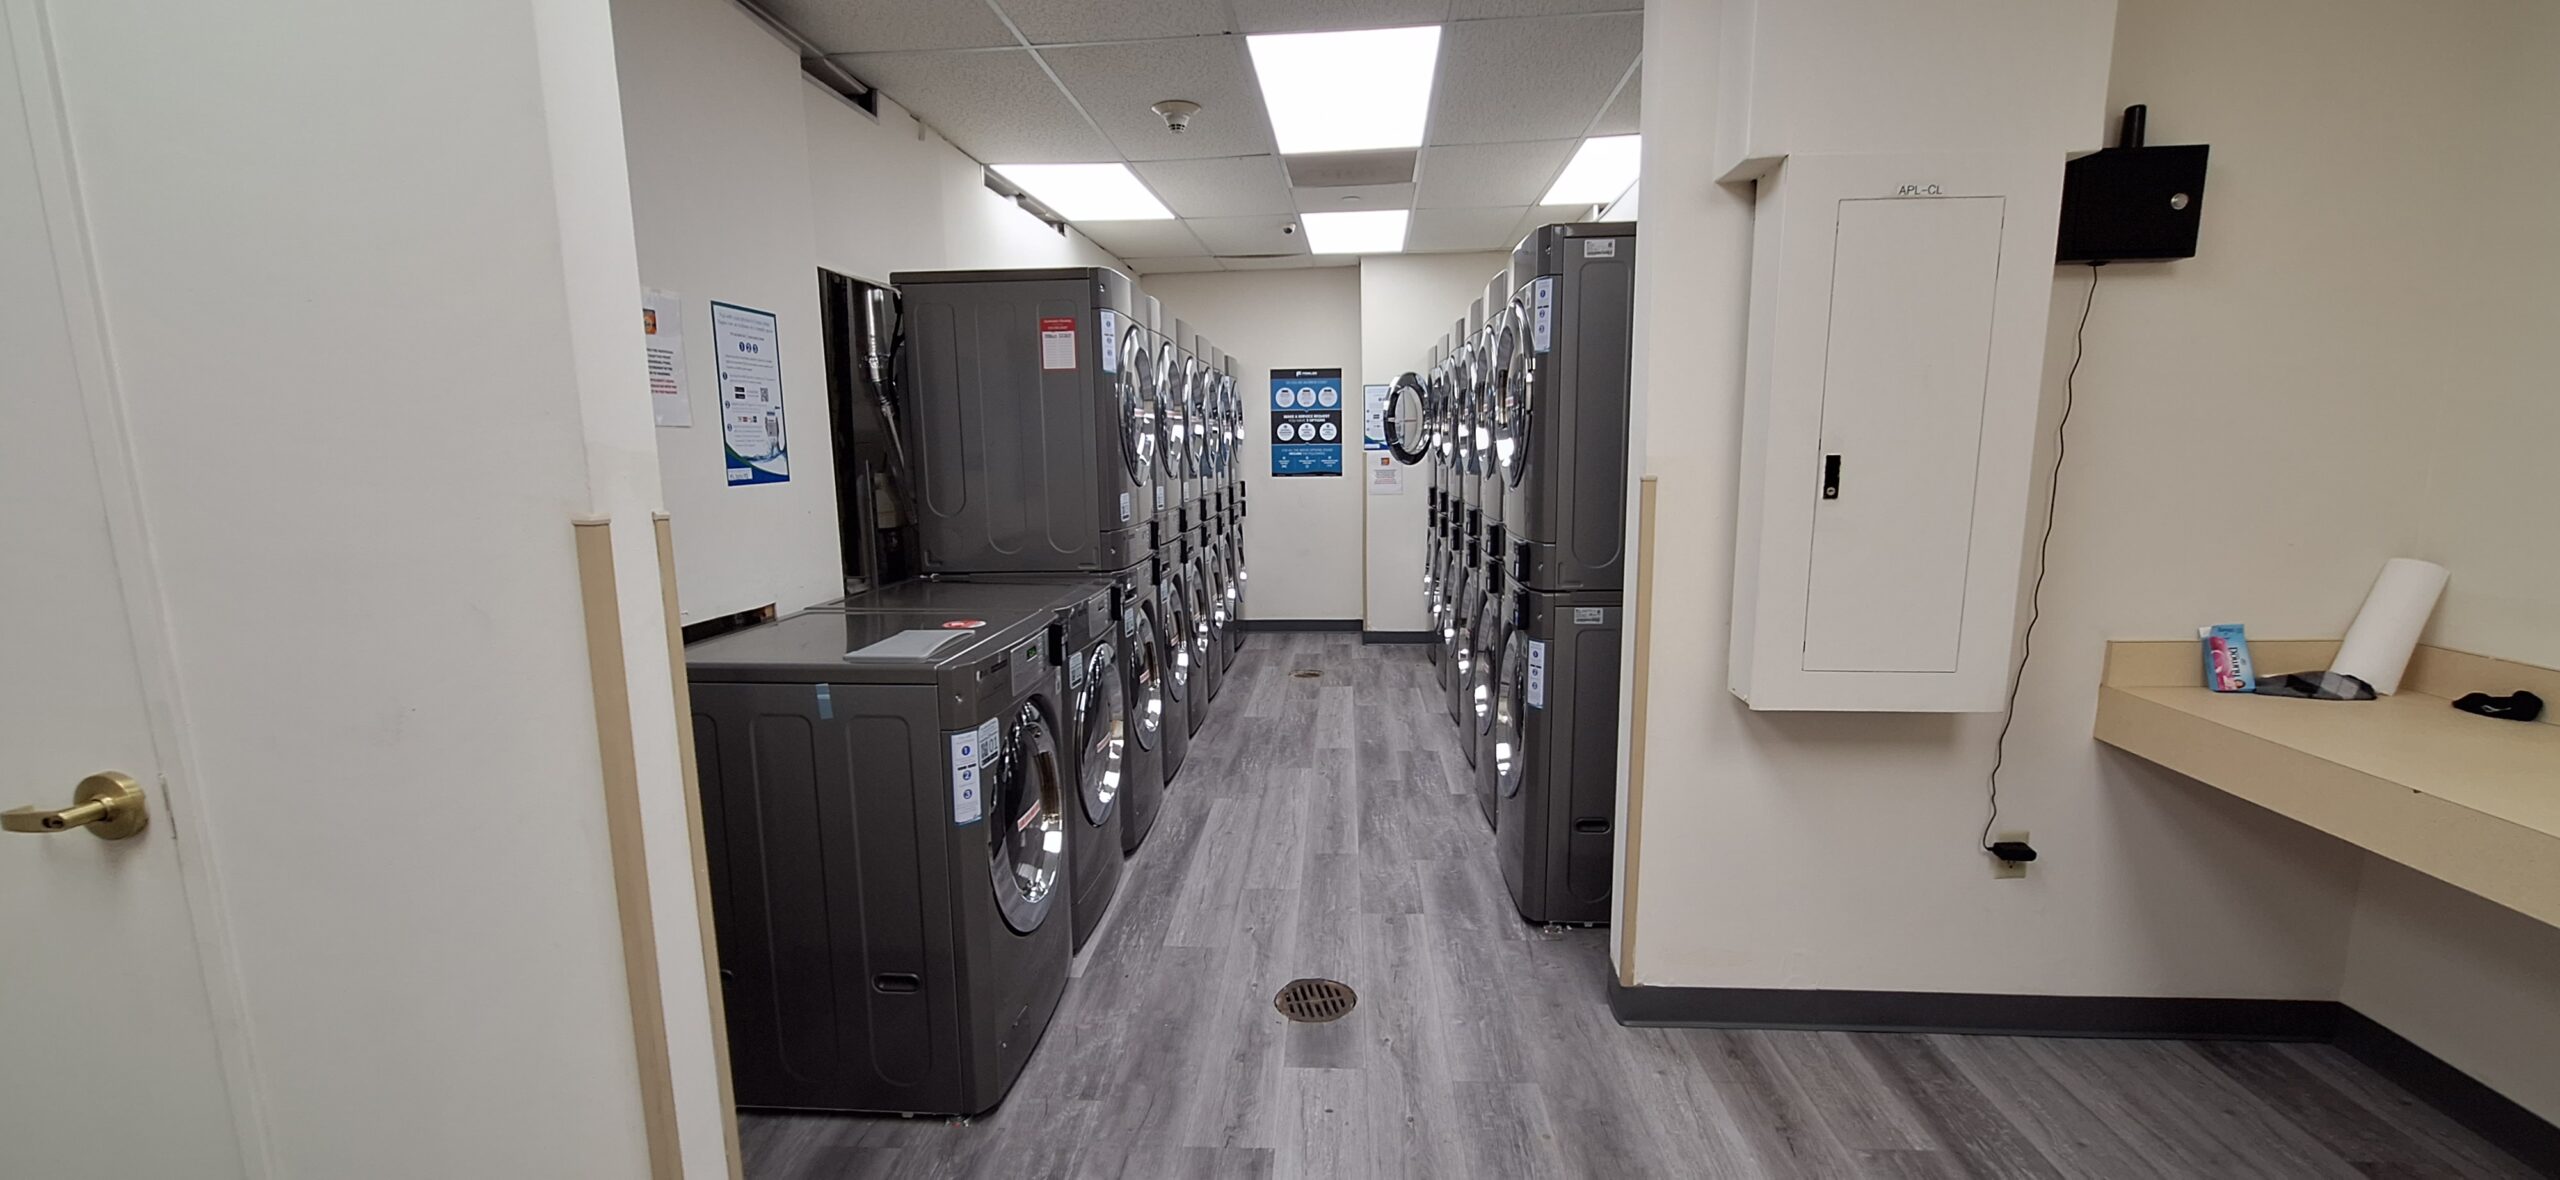 a laundry room with several washing machines